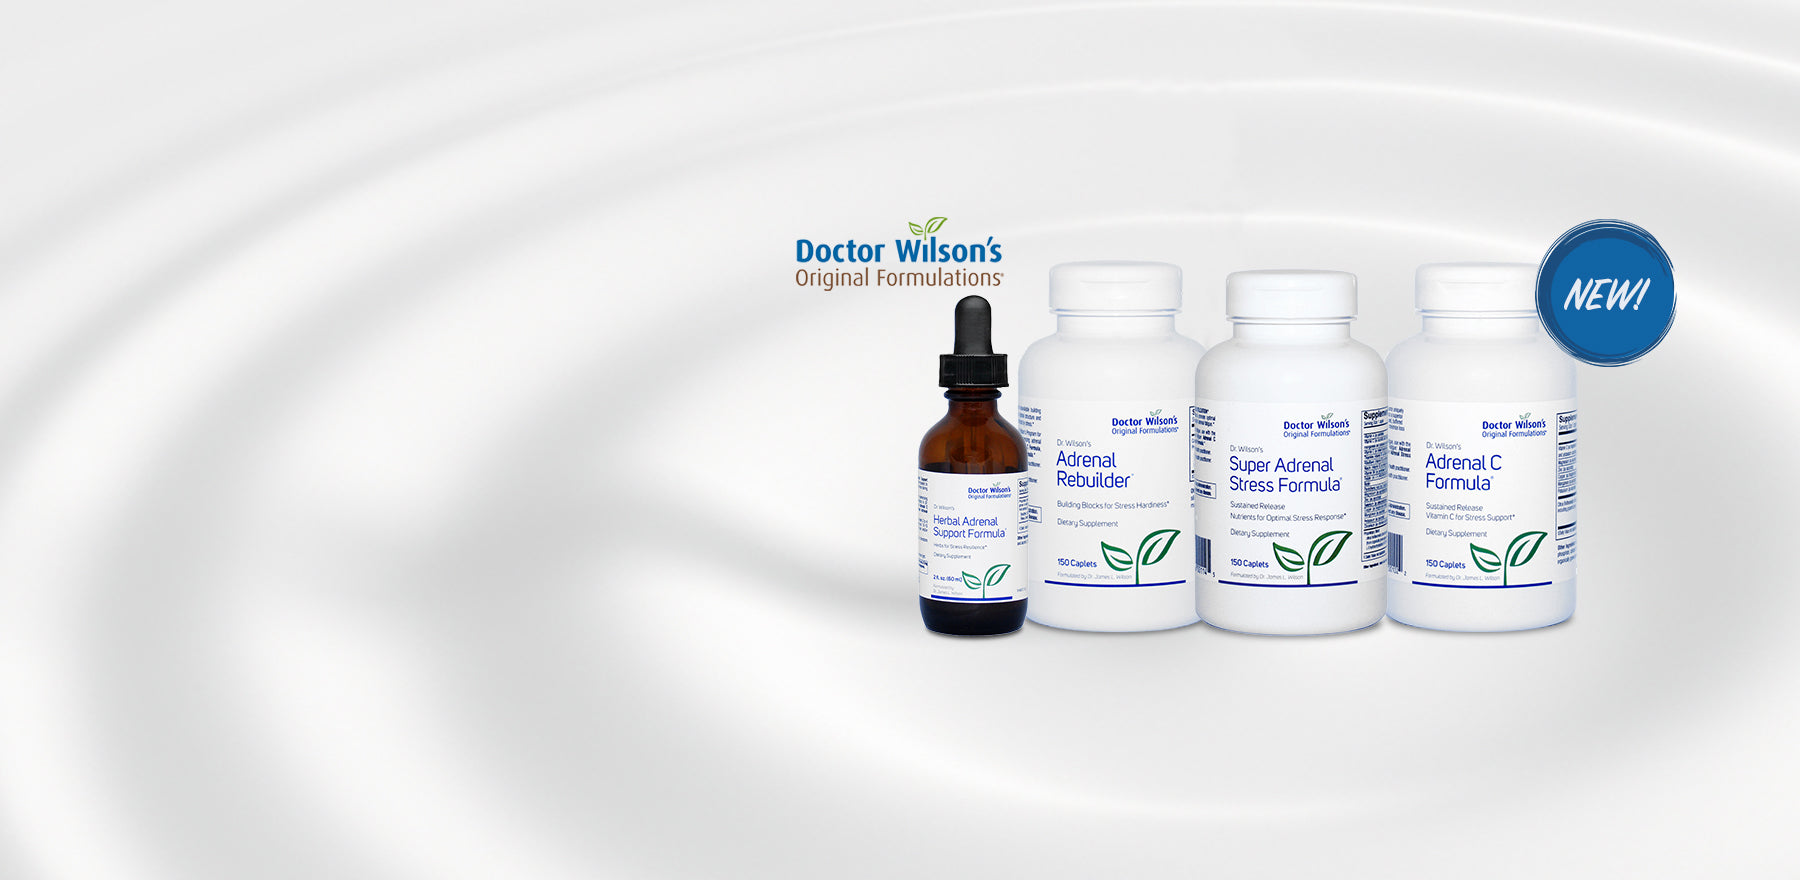 Shop Doctor Wilson's Original Formulations - Now Available